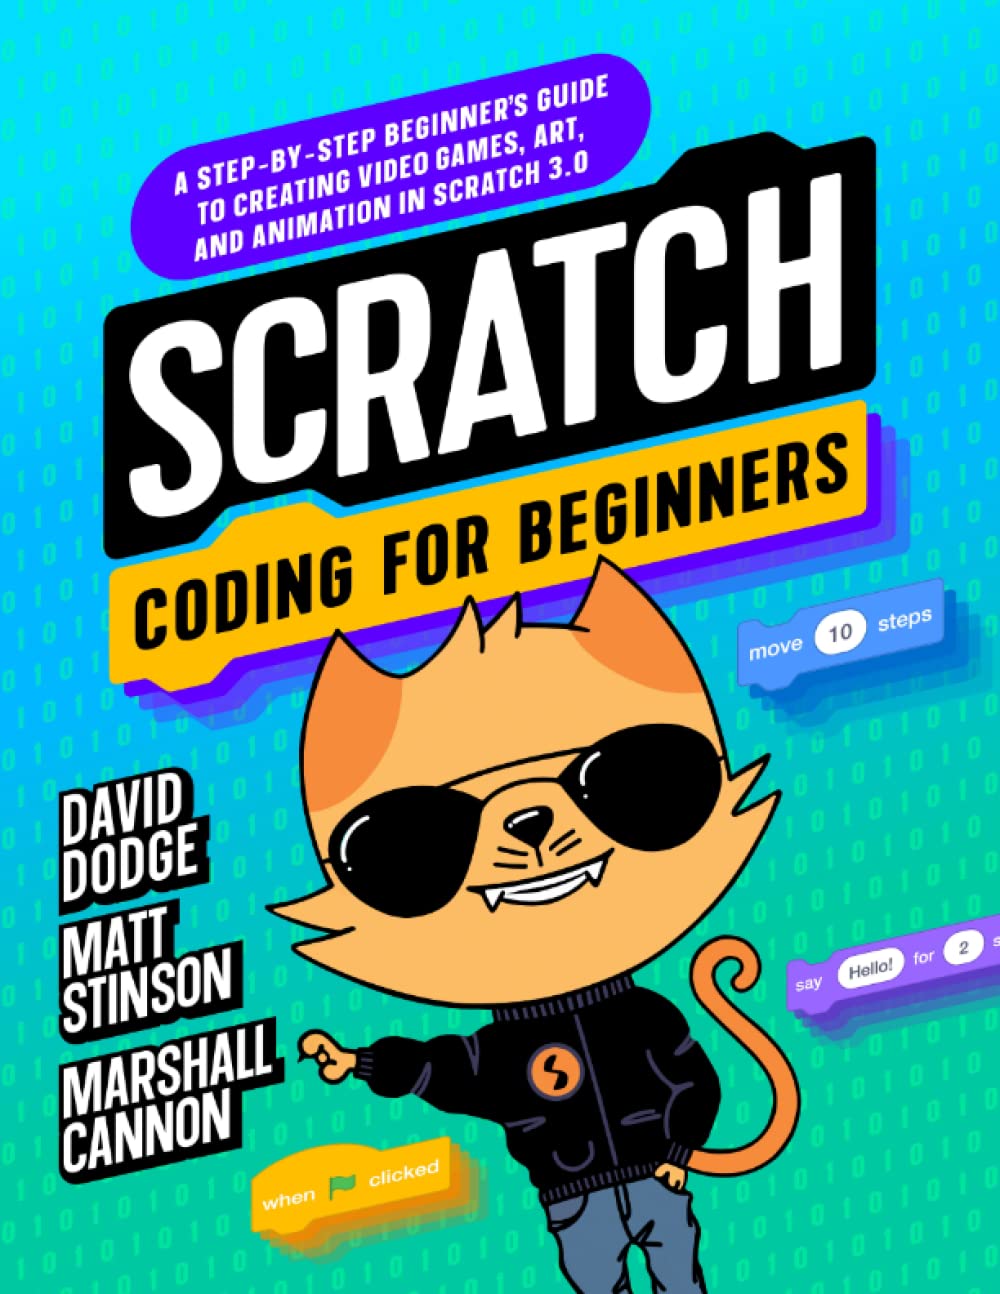 Scratch Coding for Beginners: A Step-By-step Beginner's Guide to Creating Video Games, Art, and Animation in Scratch 3.0